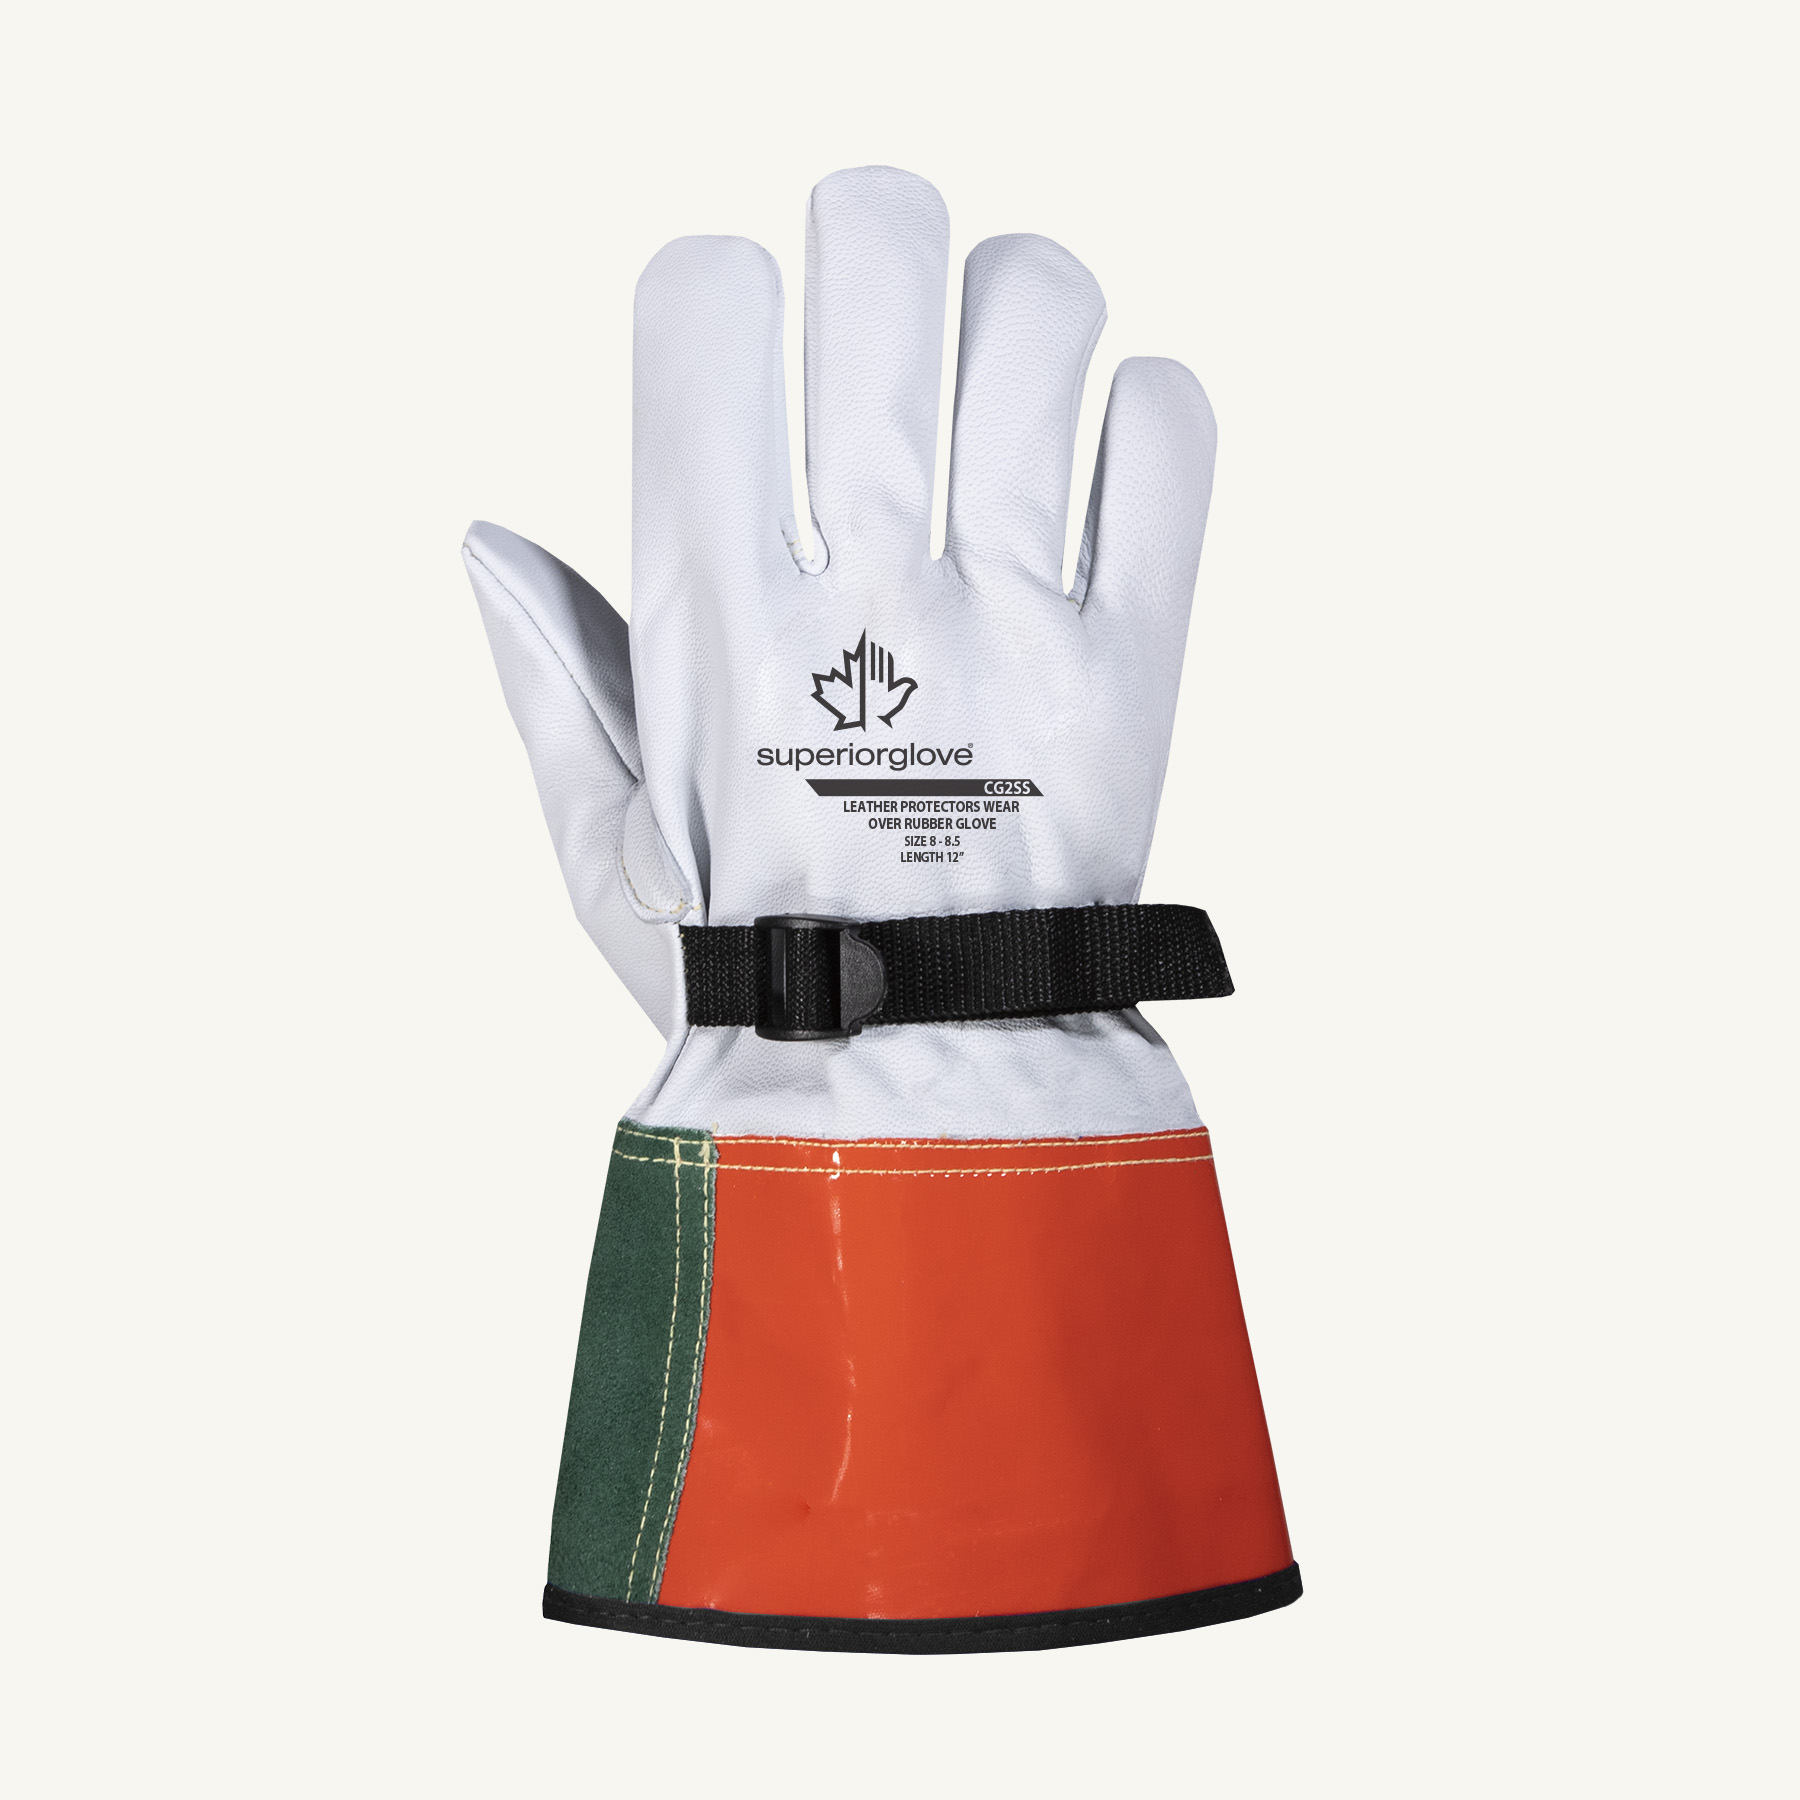 Superior Glove® Endura® CG2SS Leather Cover Gloves, Class 2